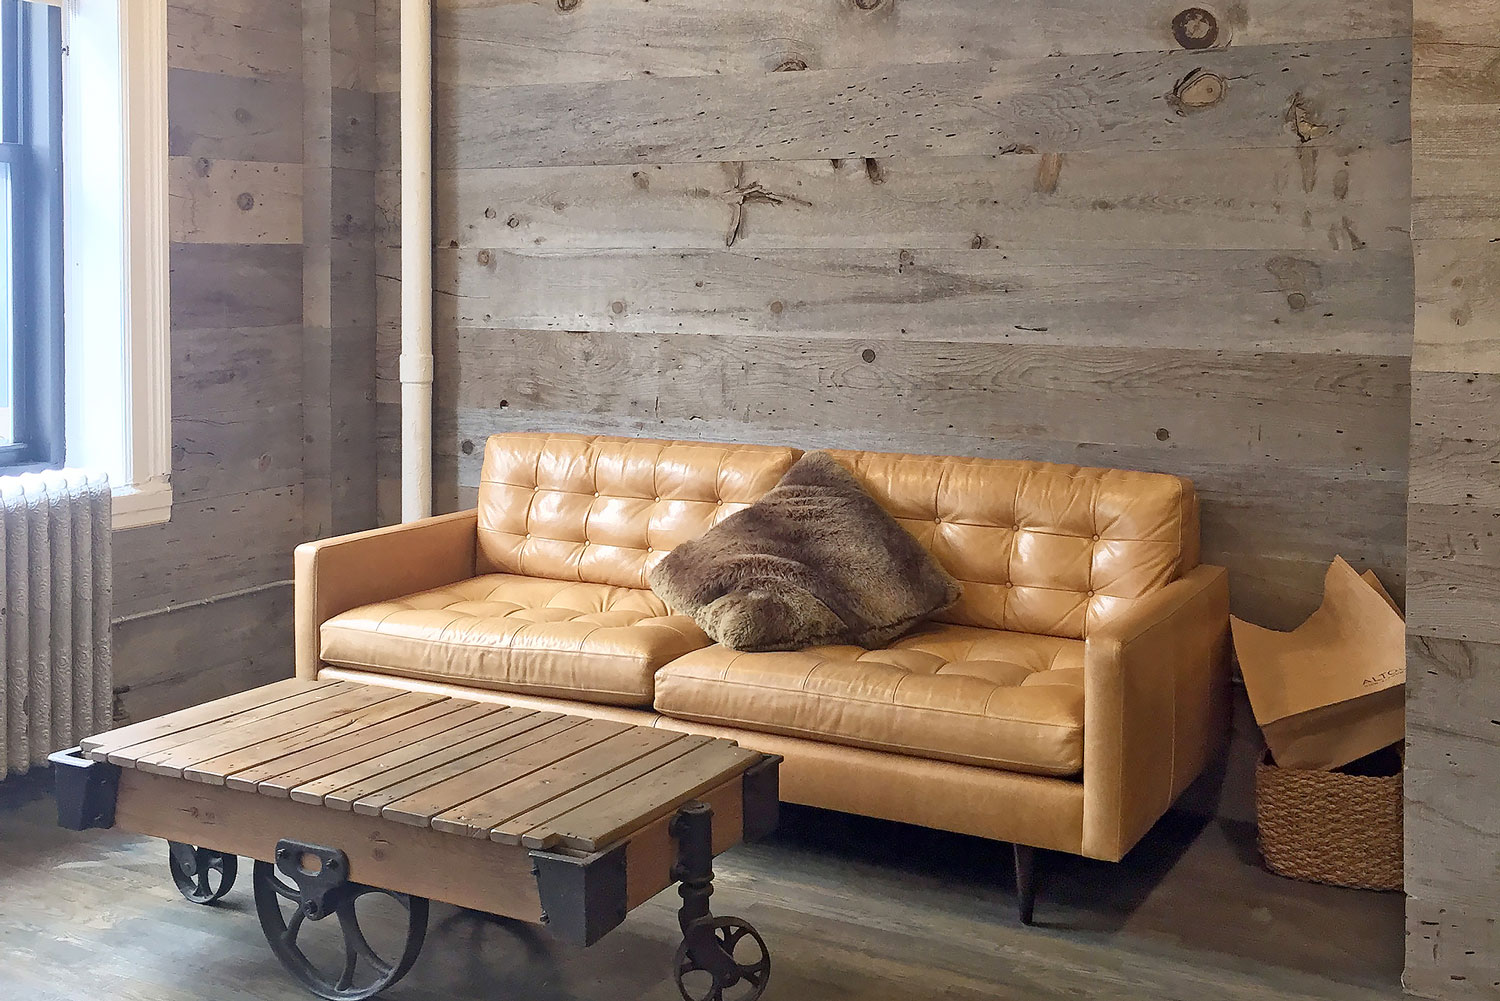 Beige leather sofa and wooden coffee table with wooden paneled wall